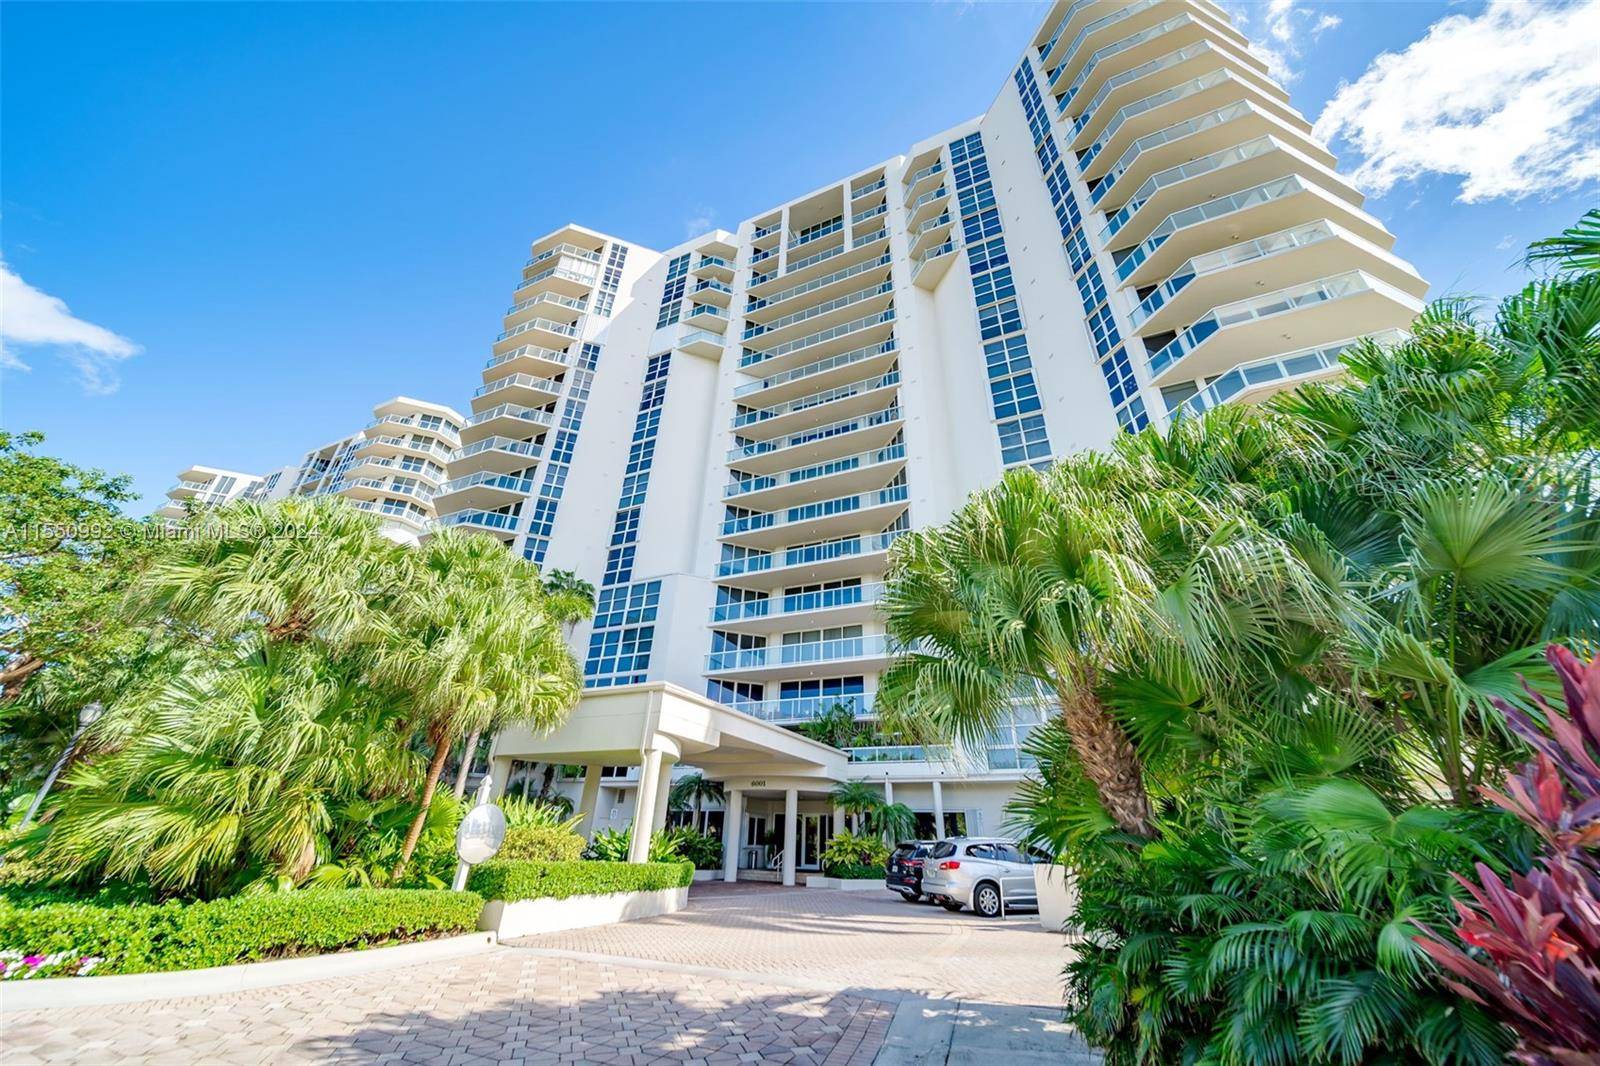 Nestled on the seventh floor of the exclusive Renaissance on The Ocean residence, this luxurious 2 bed, 2.